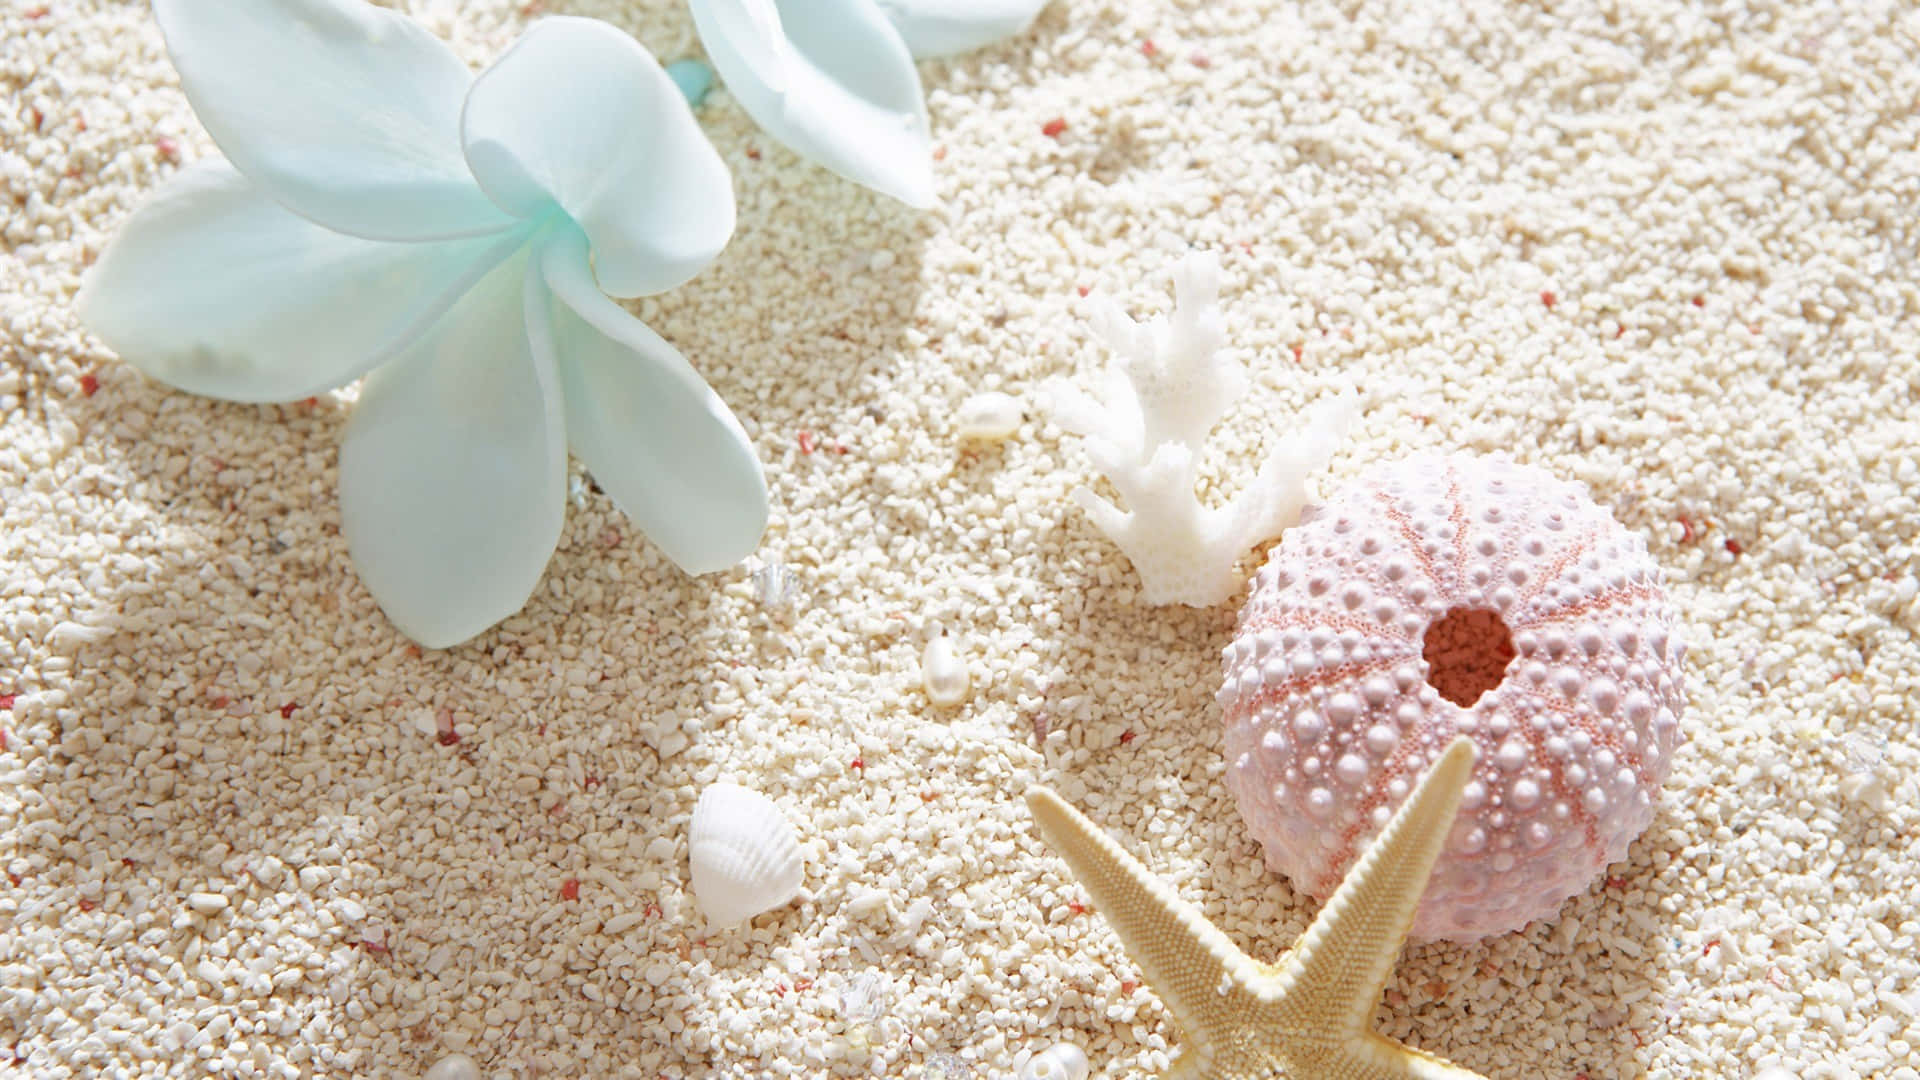 A collection of beautiful seashells on a sandy beach background